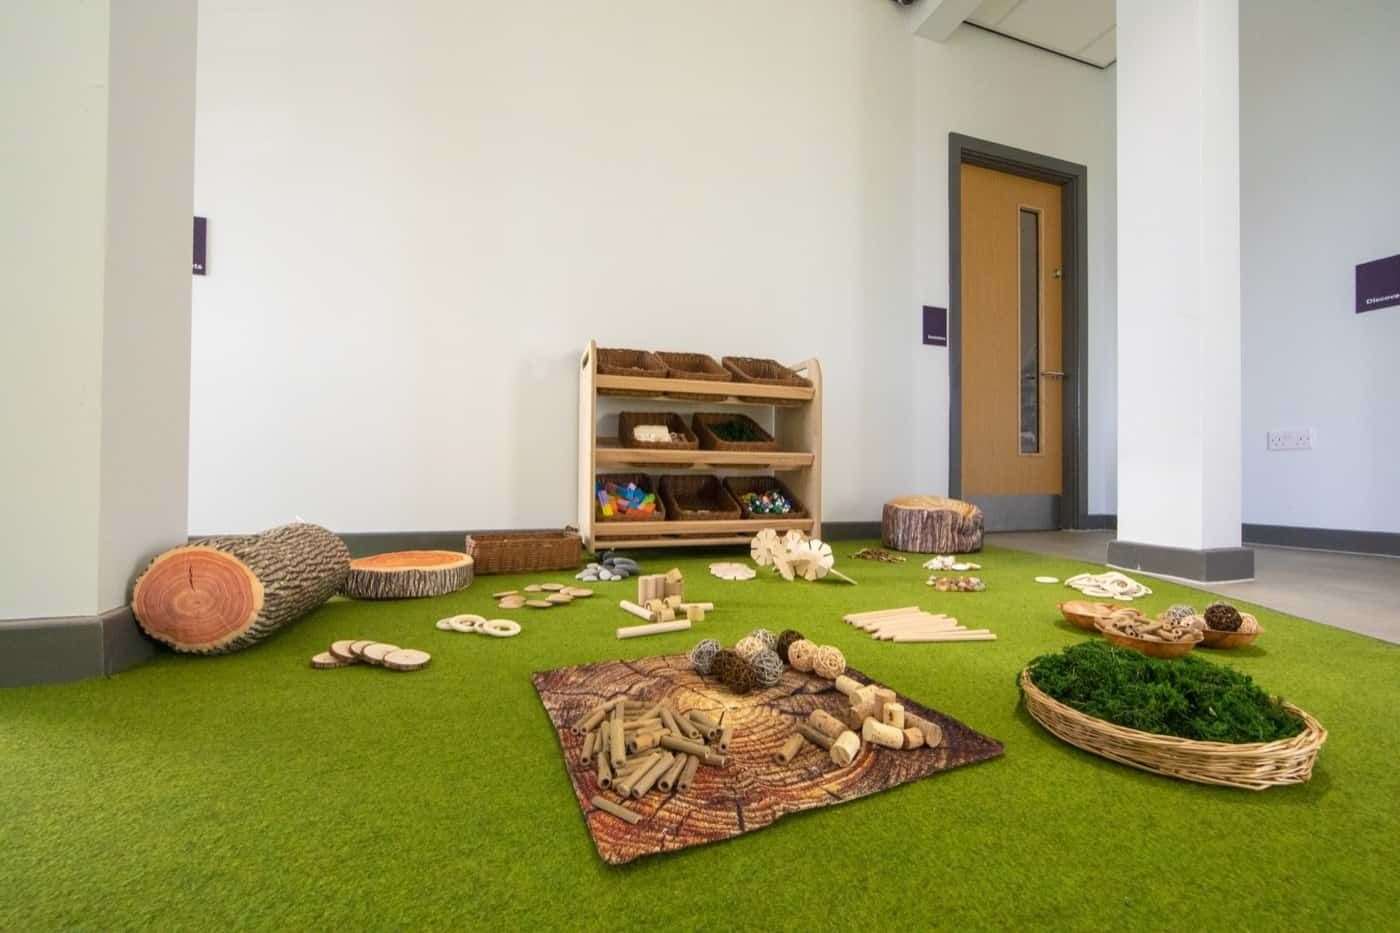 Children will play with natural materials